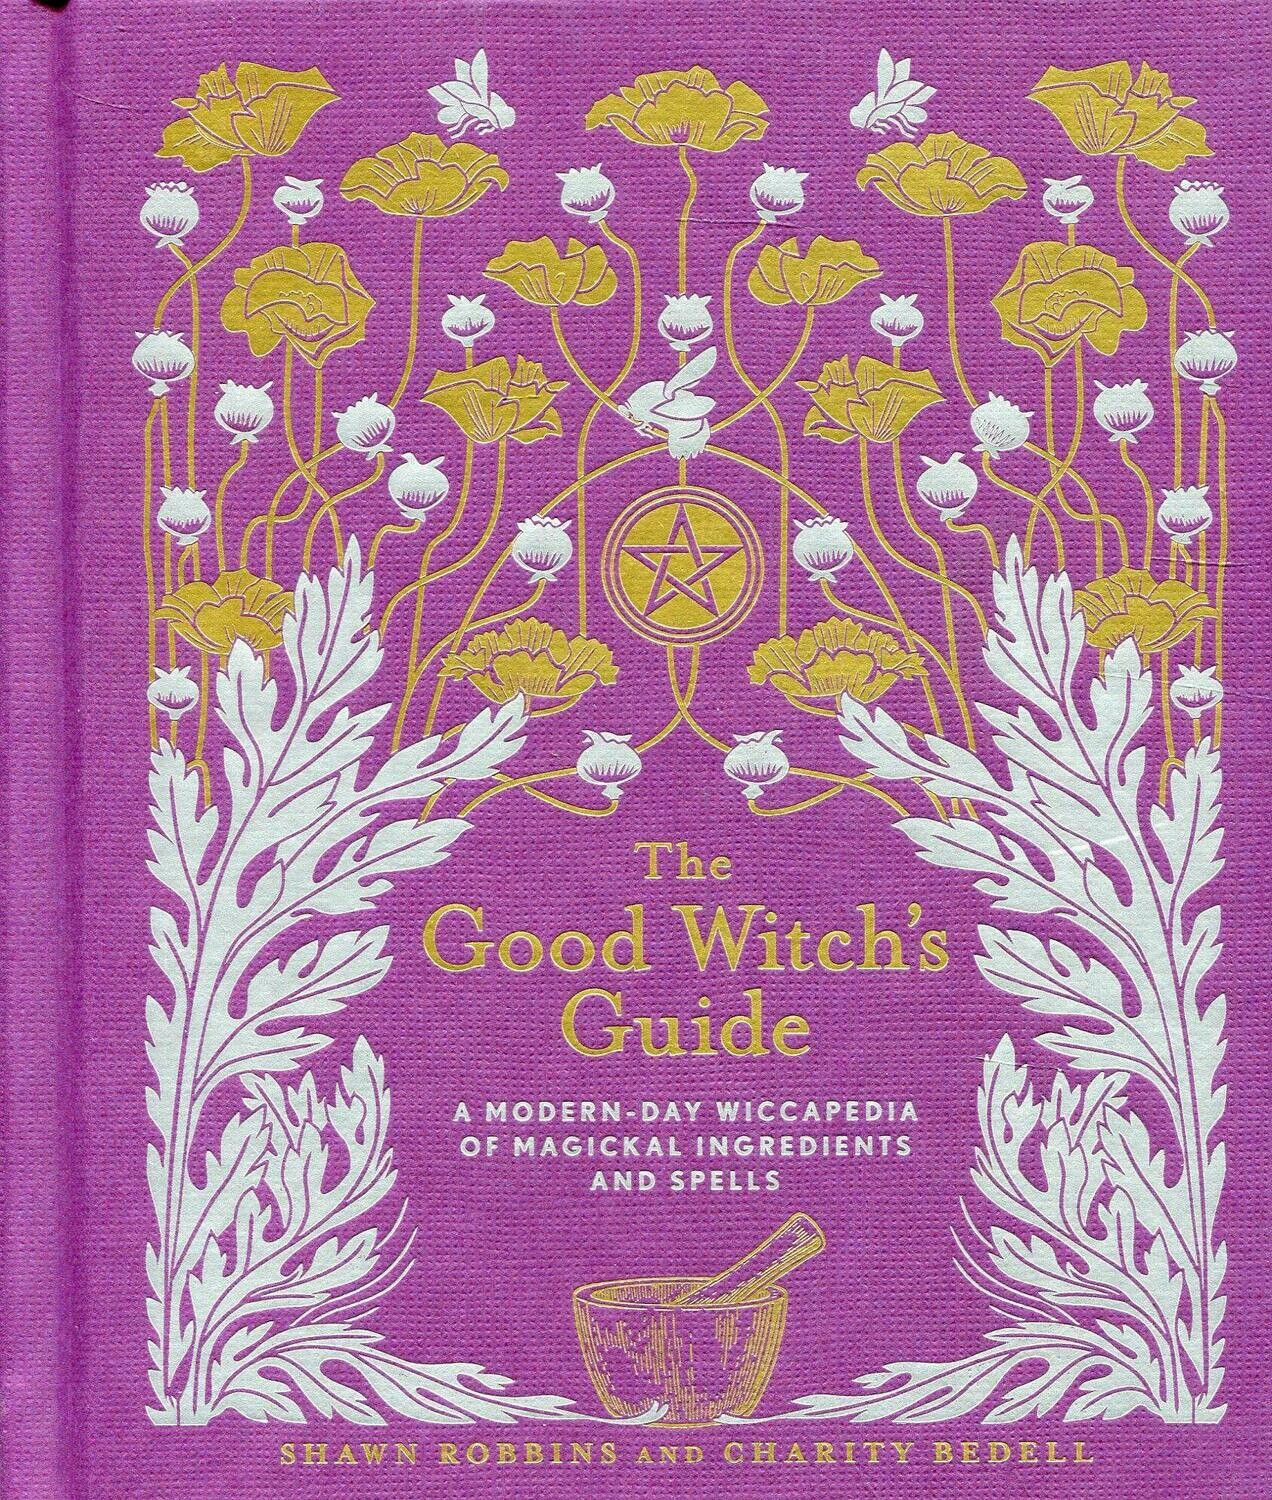 The Good Witch's Guide, A Modern-Day Wiccapedia of Magickal Ingredients & Spells